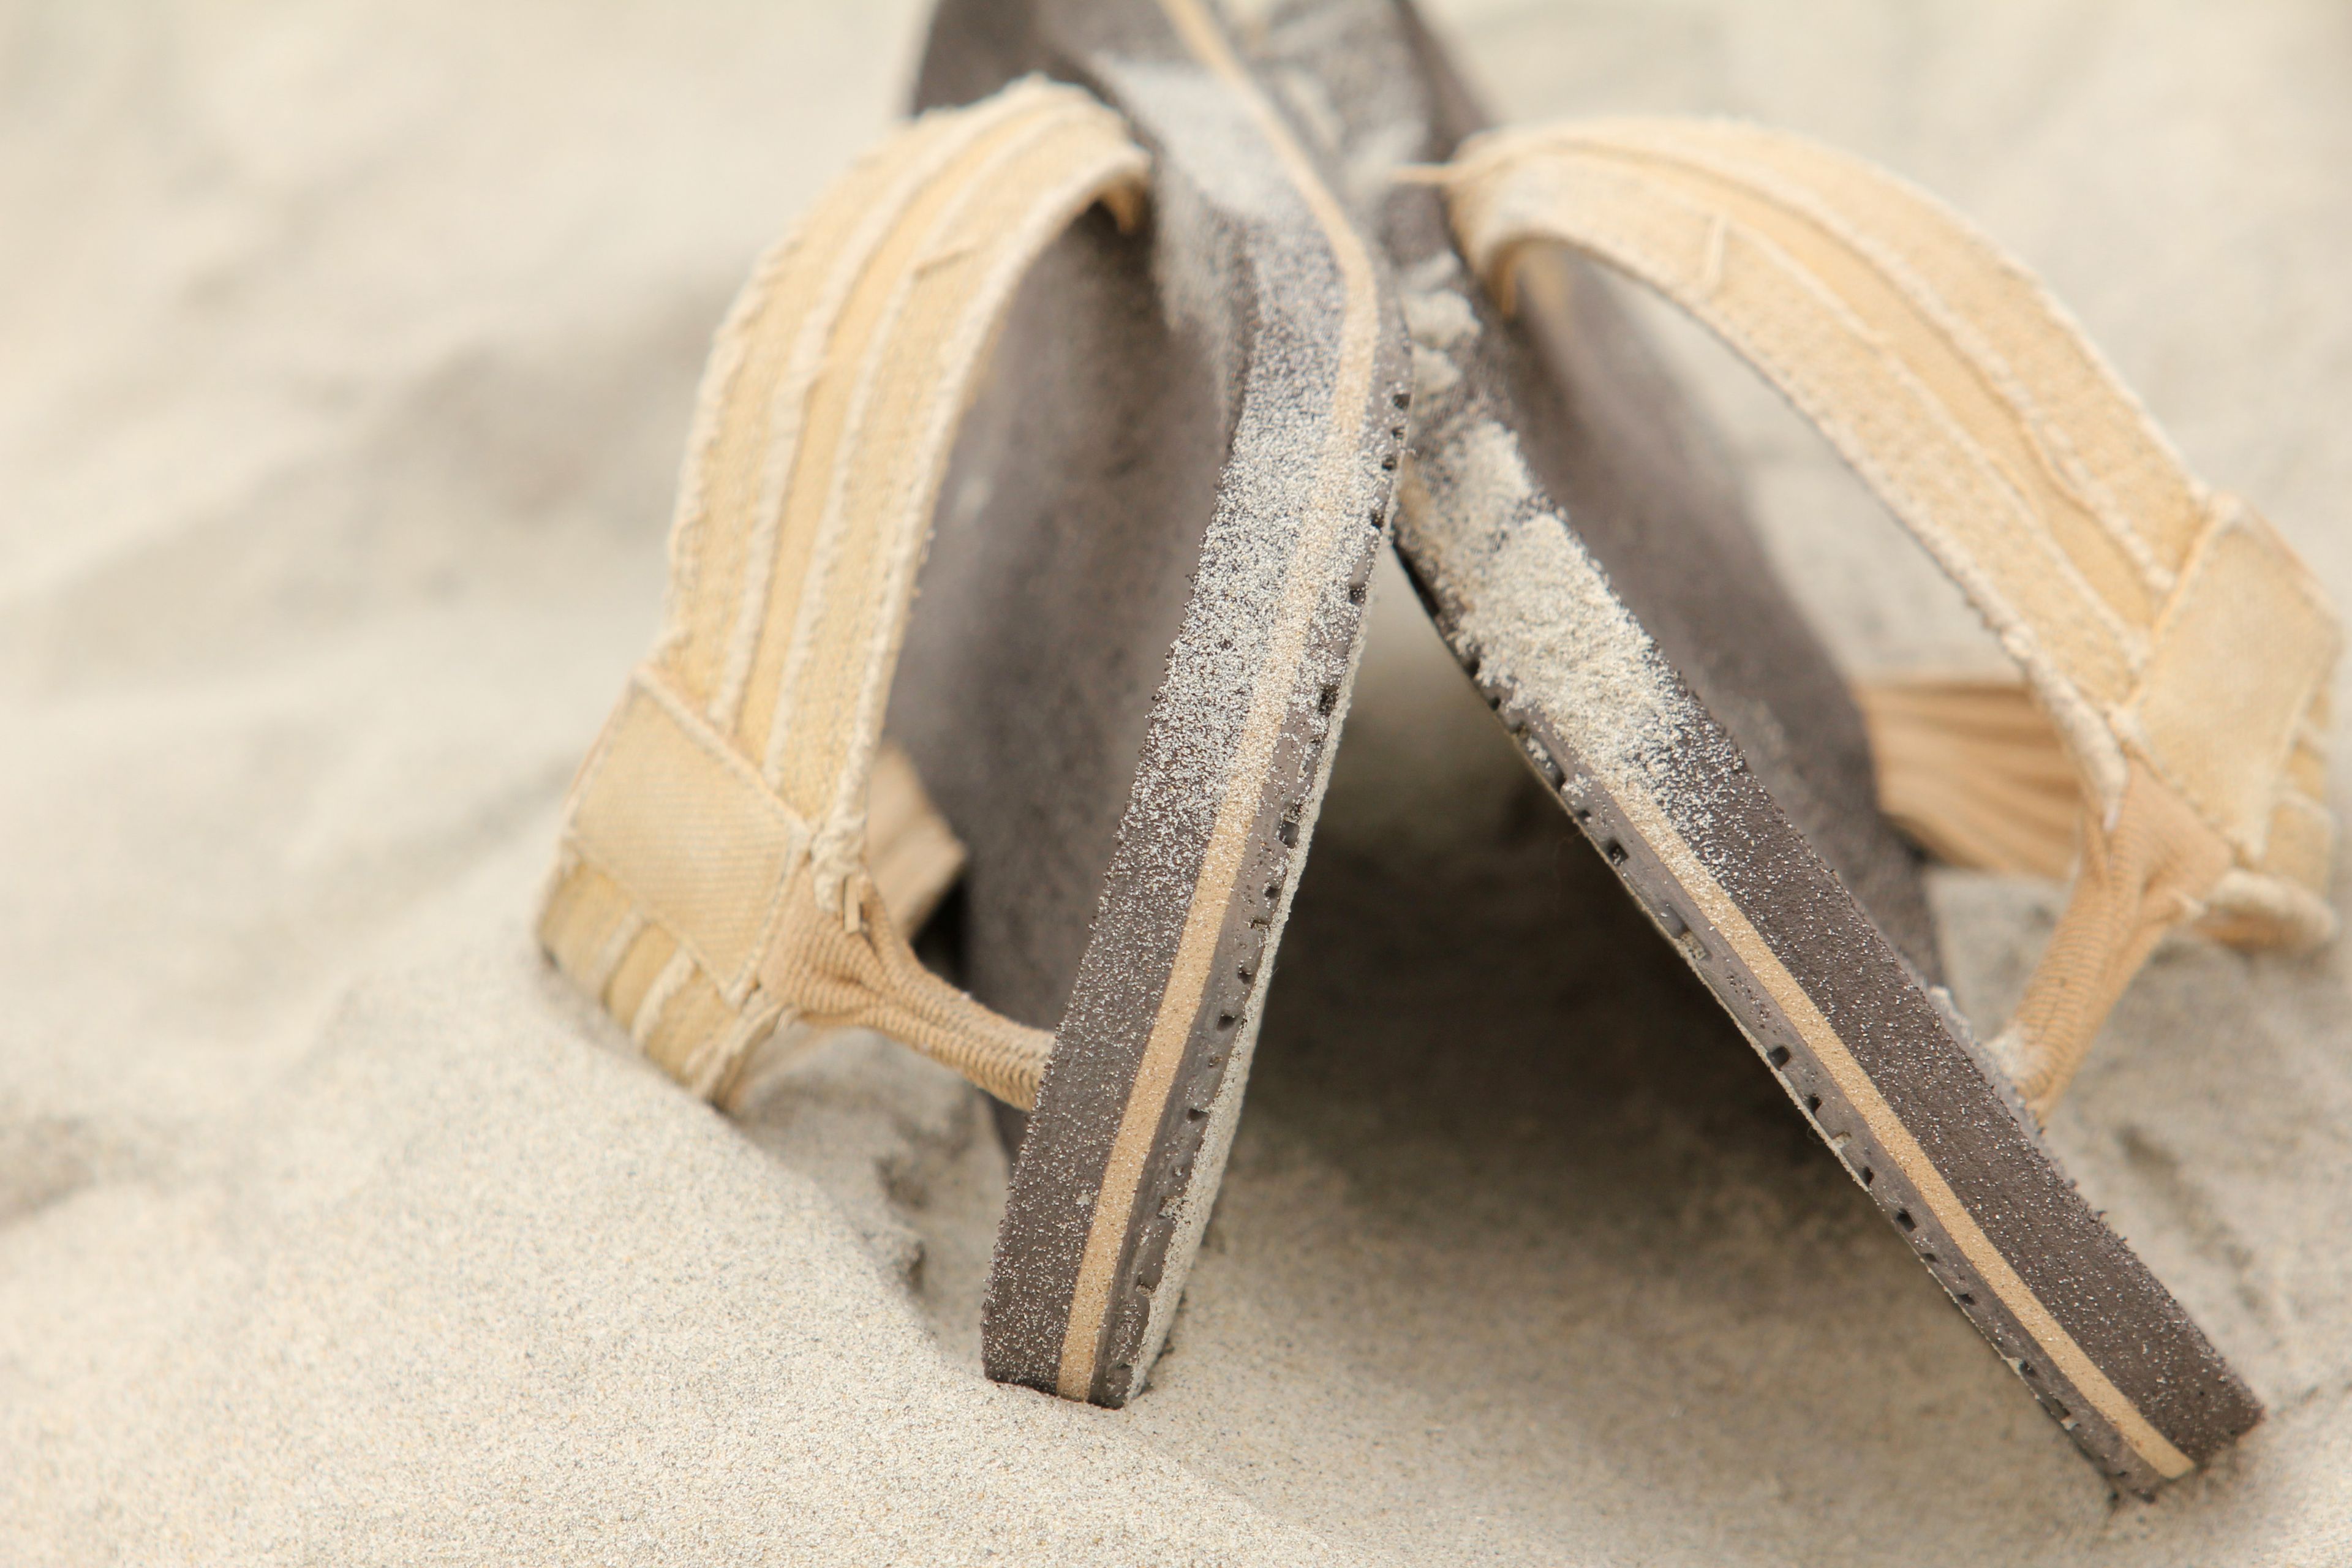 A pair of sandals lying in the sand.